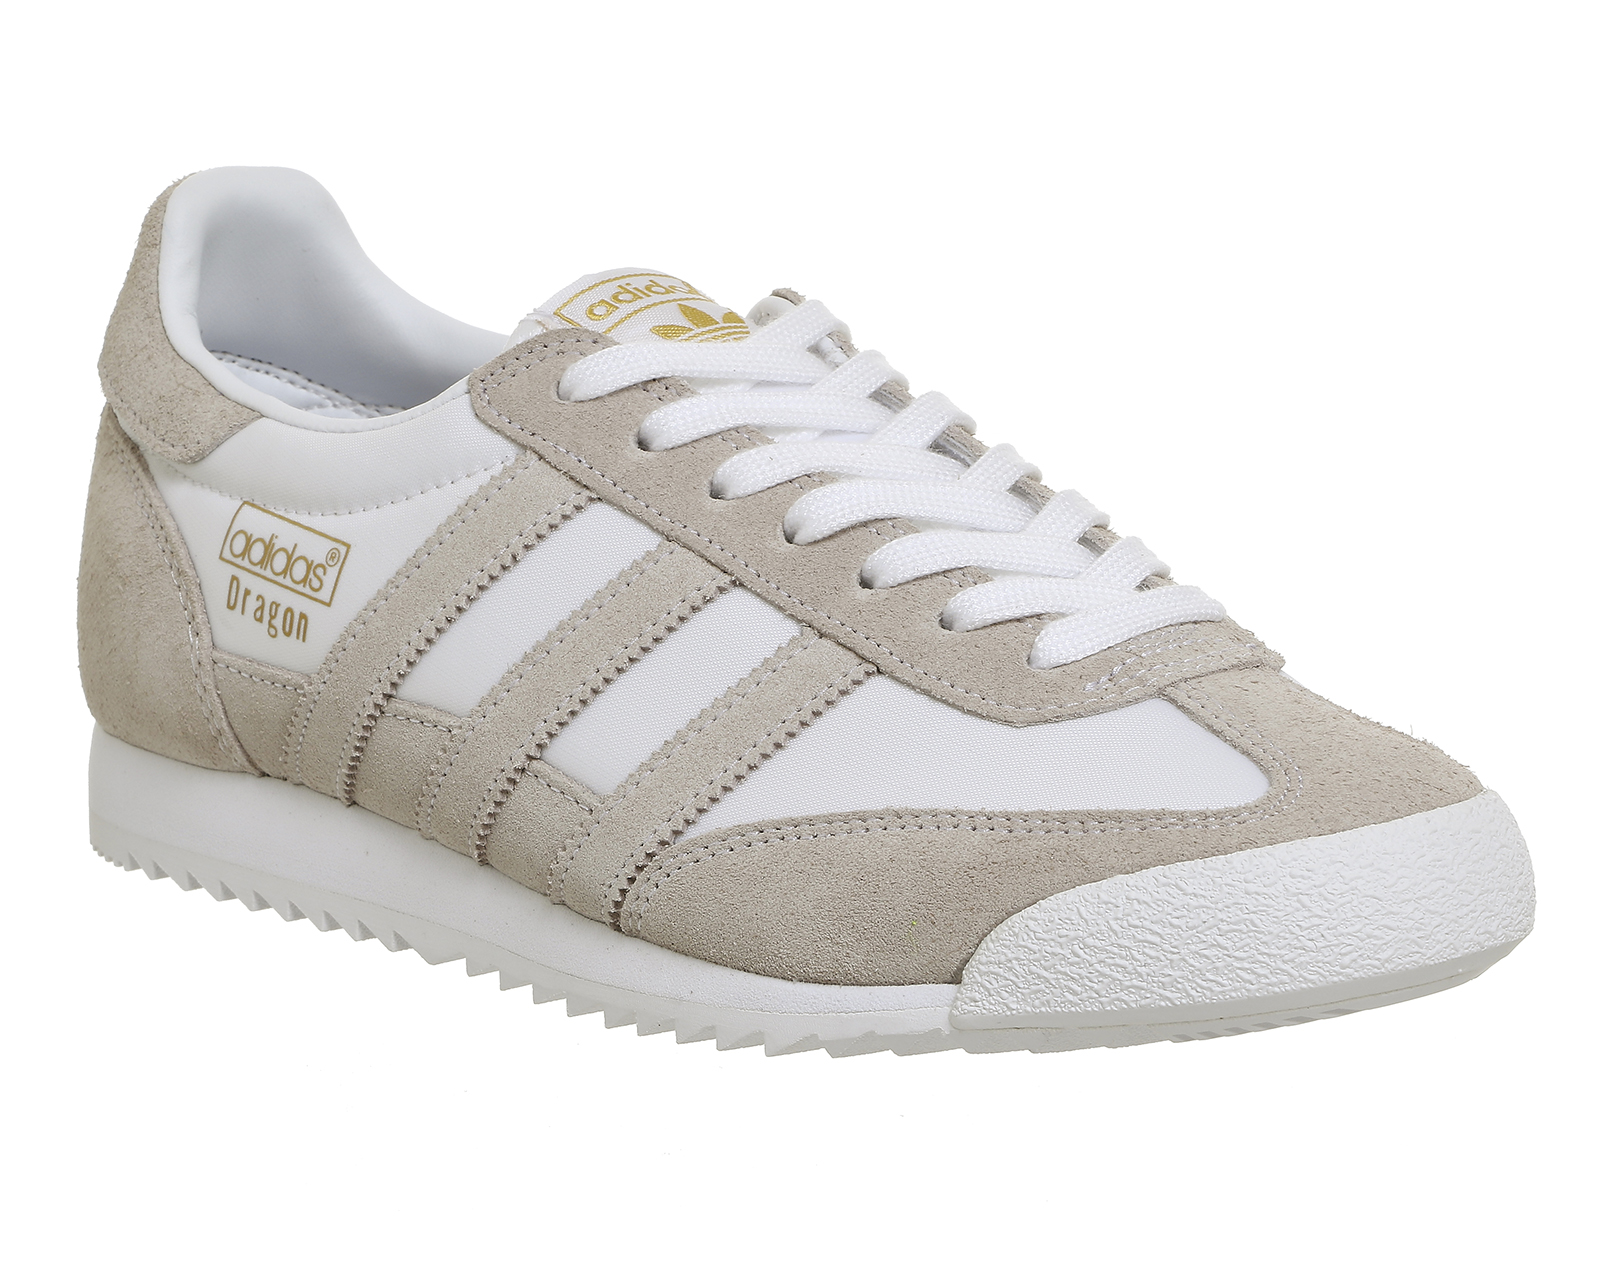 adidas Dragon Trainers Off White Gold Metallic - Hers trainers